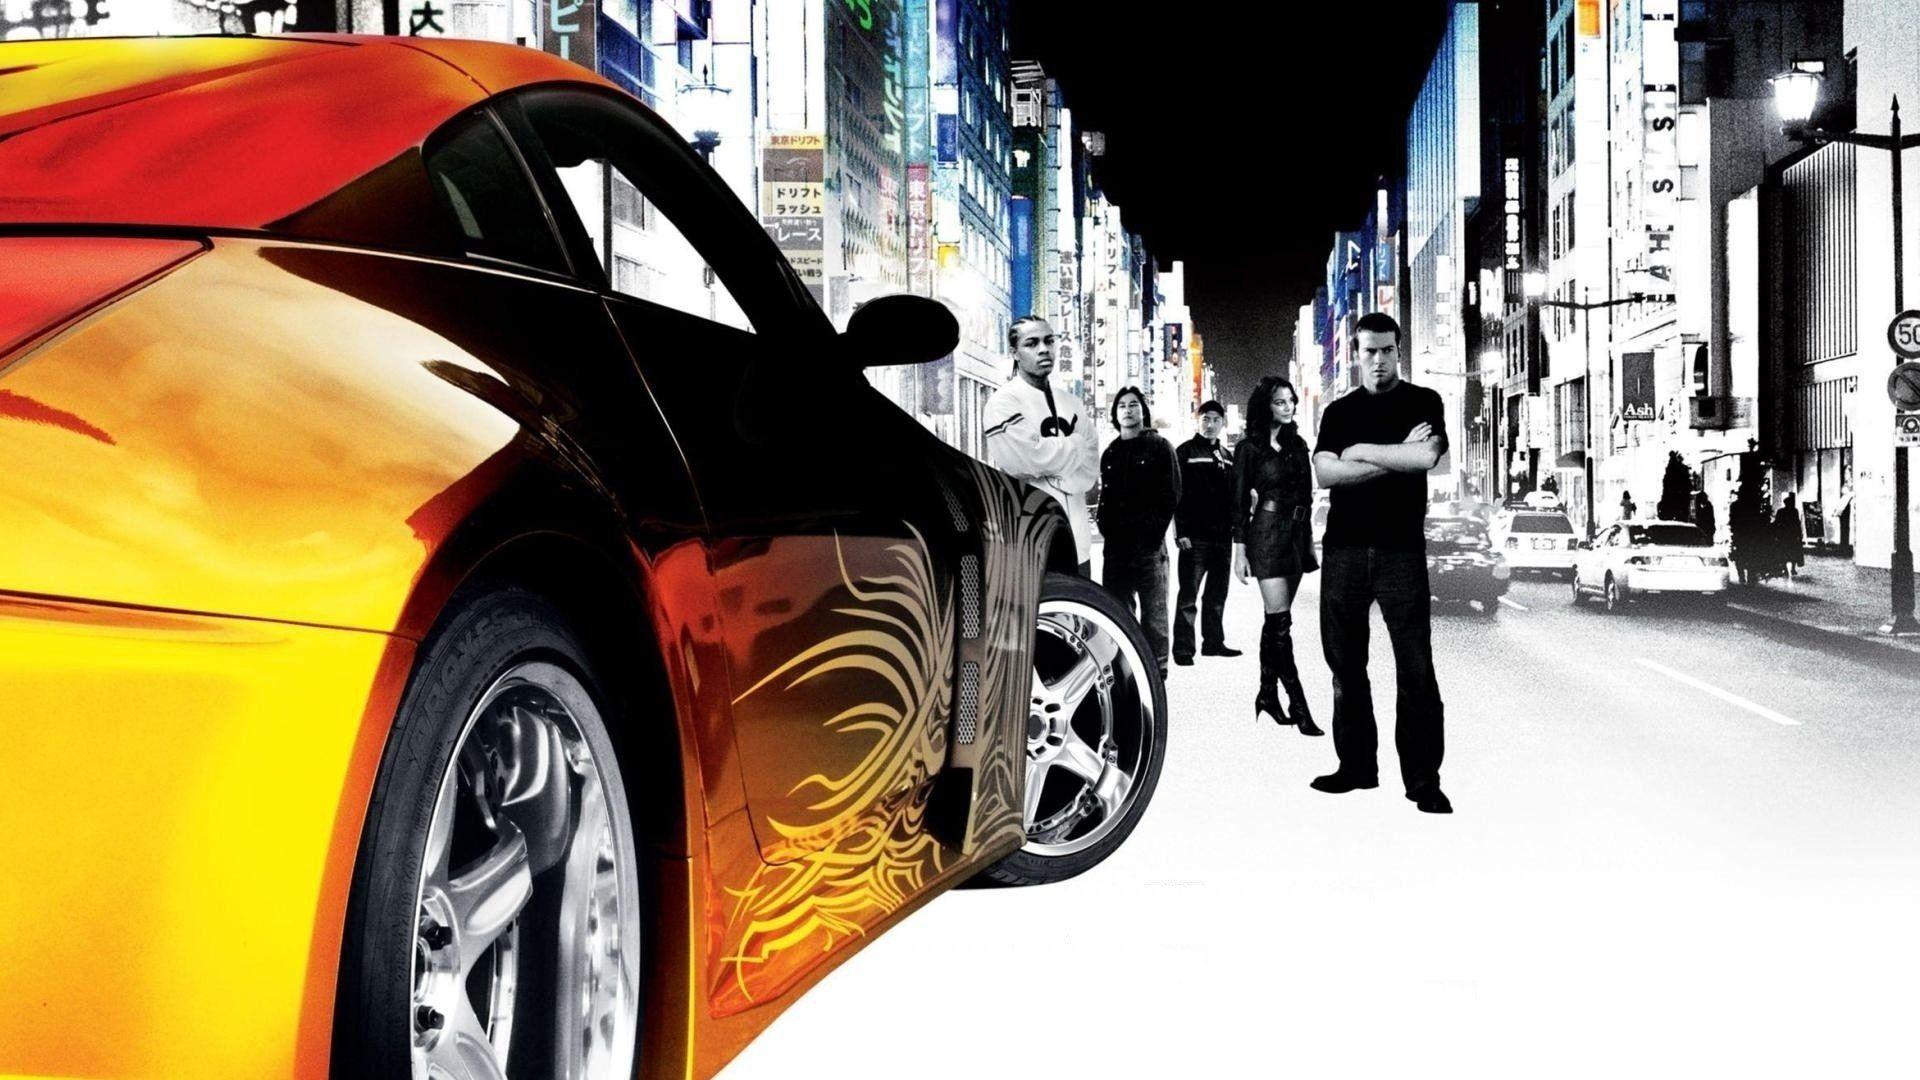 Wallpaper Hd Mobil Fast And Furious